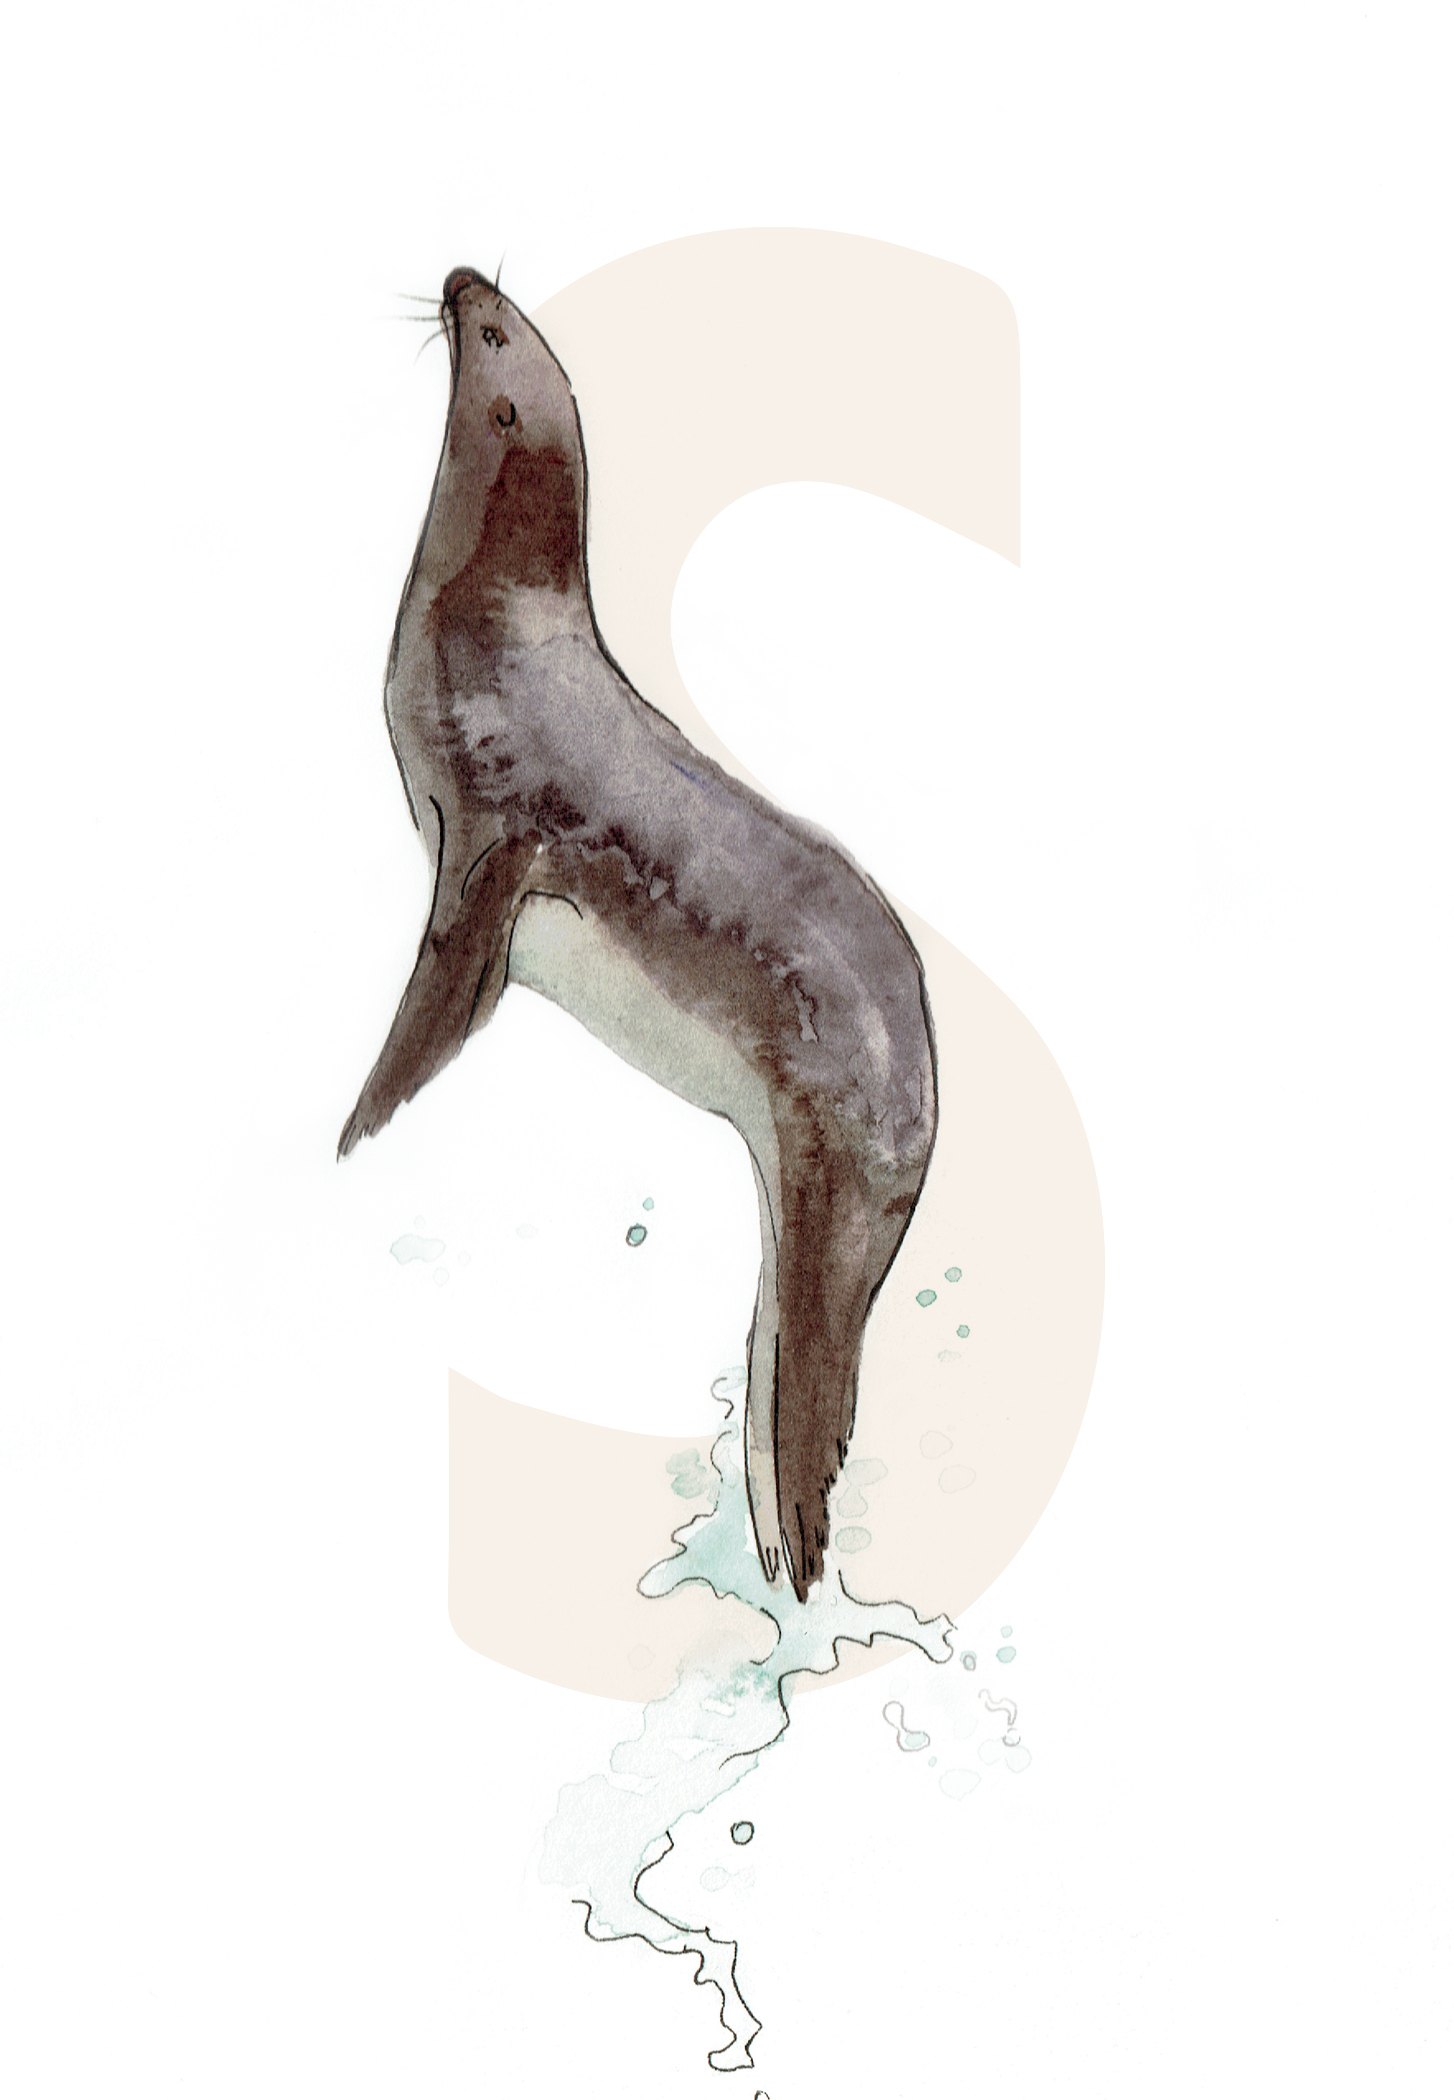 S is for Seal